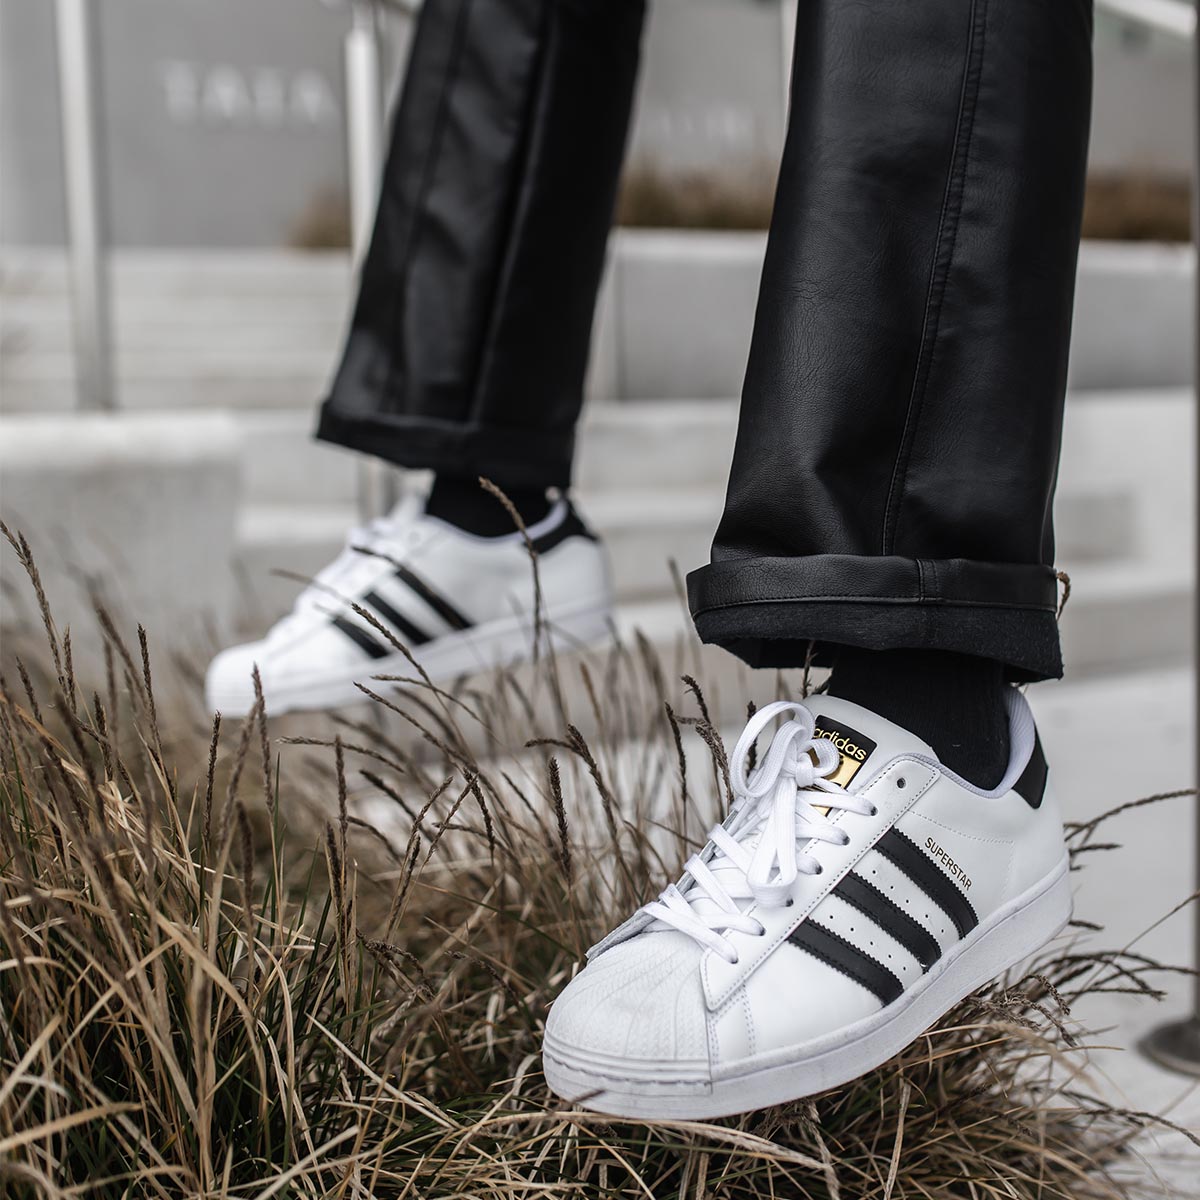 How to Wear the adidas Superstar